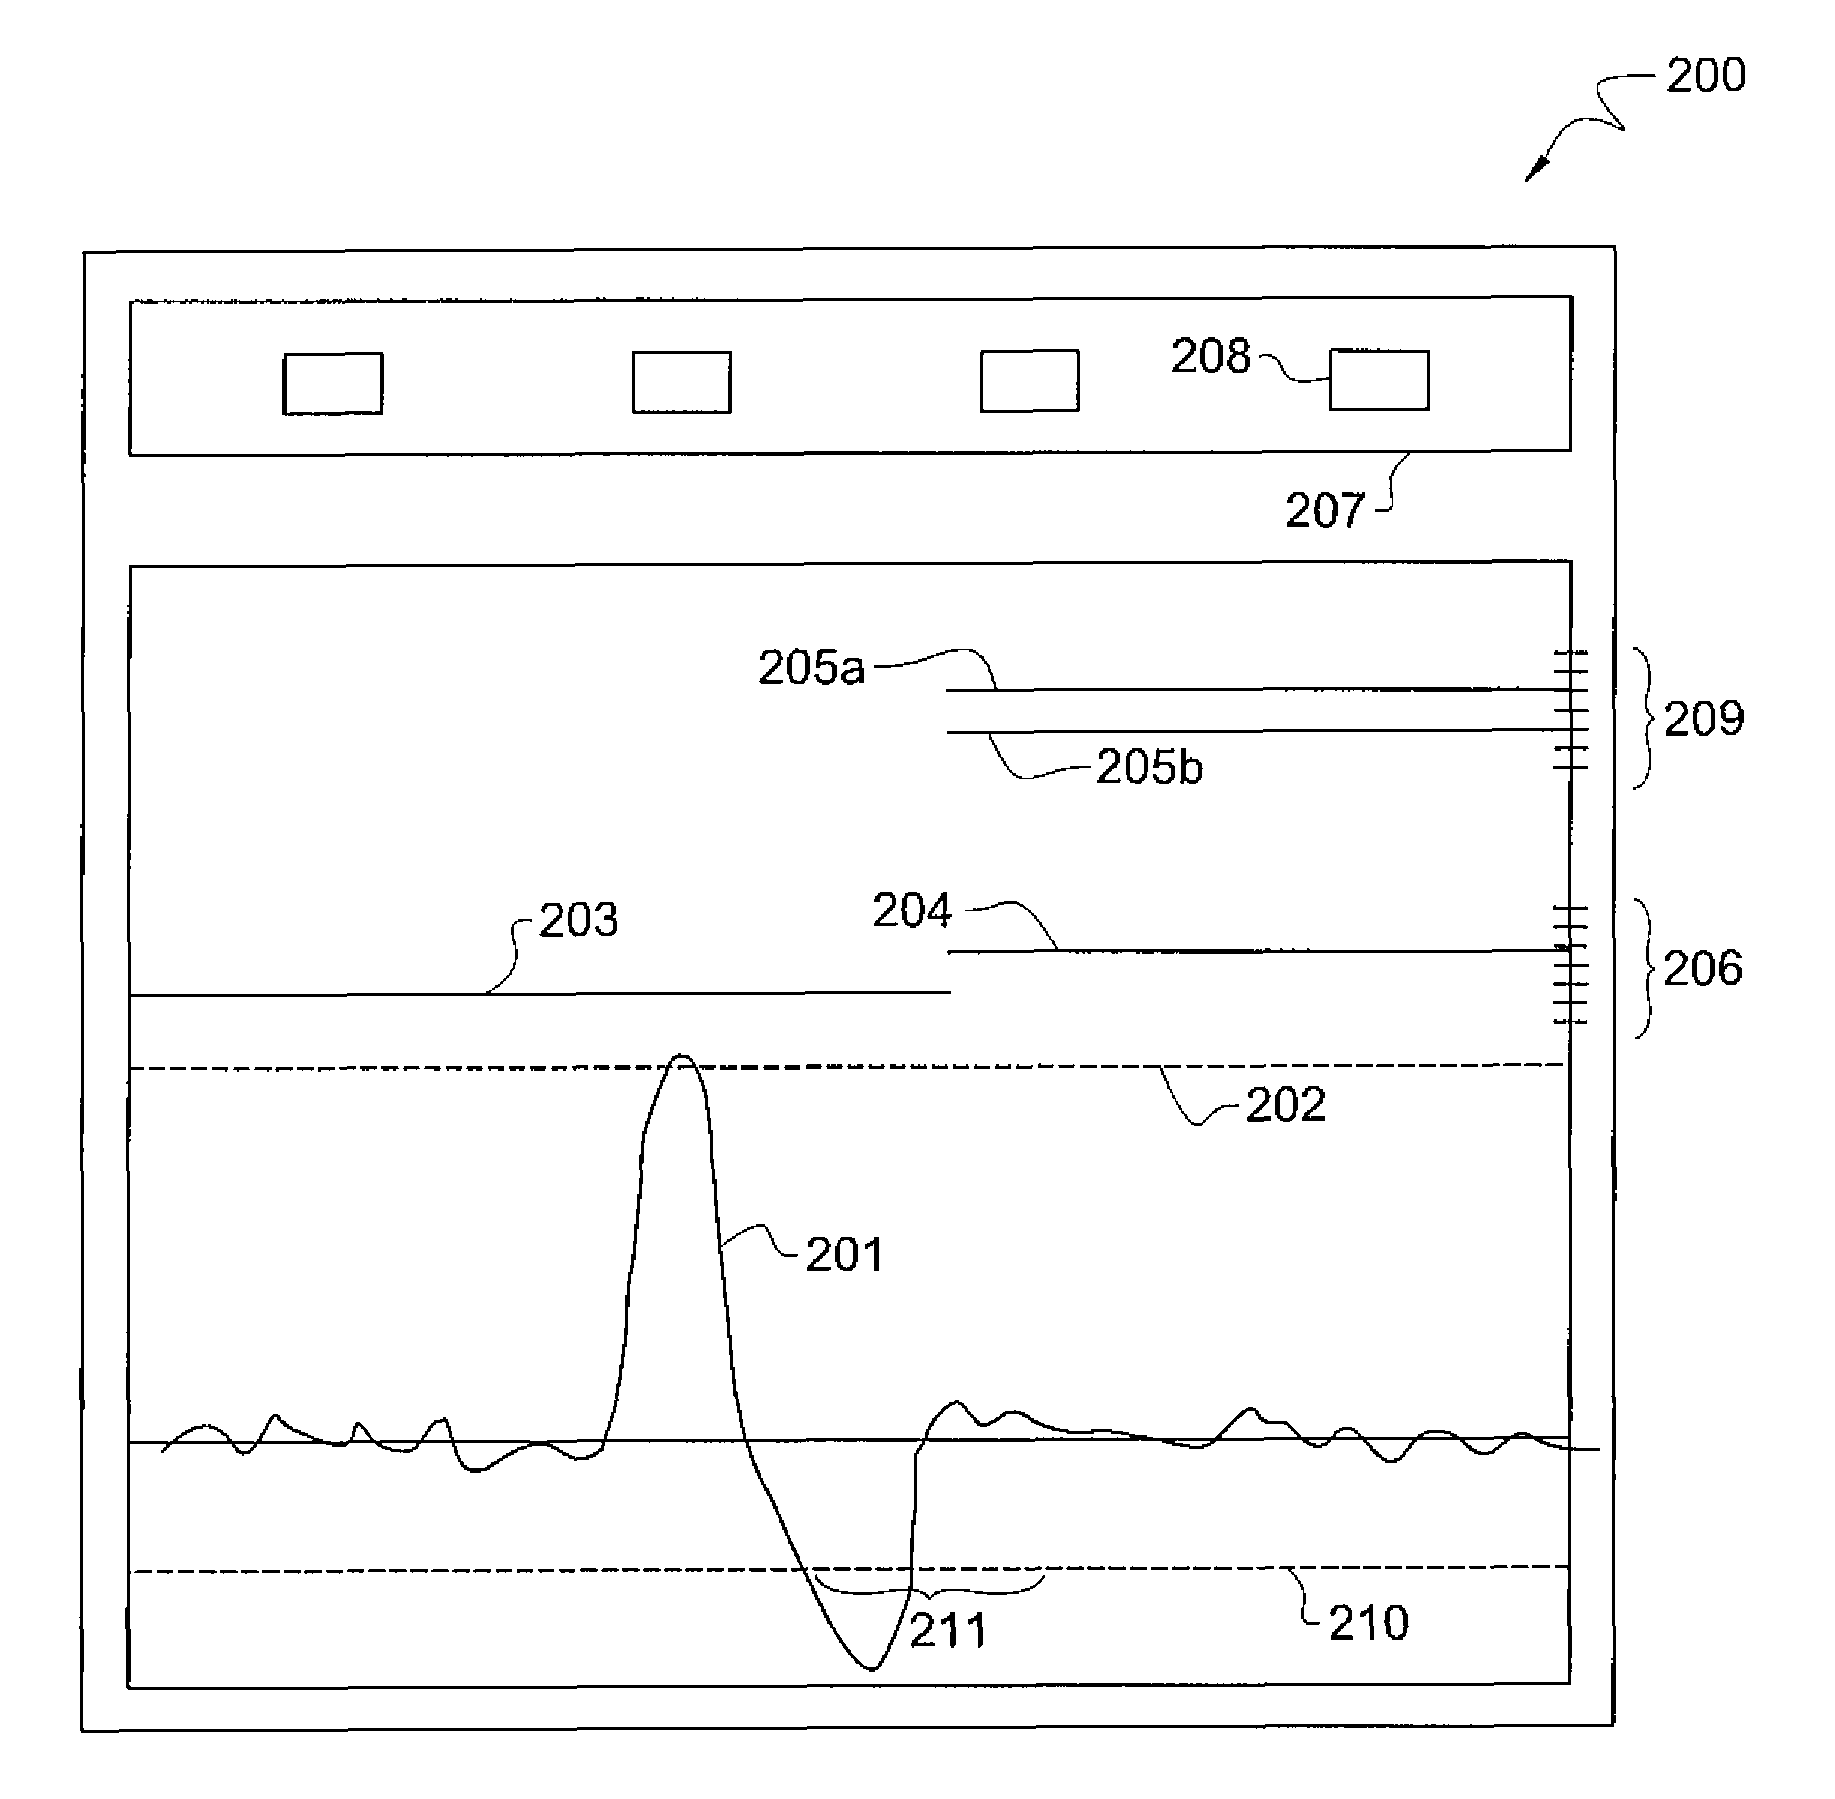 Systems and methods for graphically displaying and analyzing call treatment operations